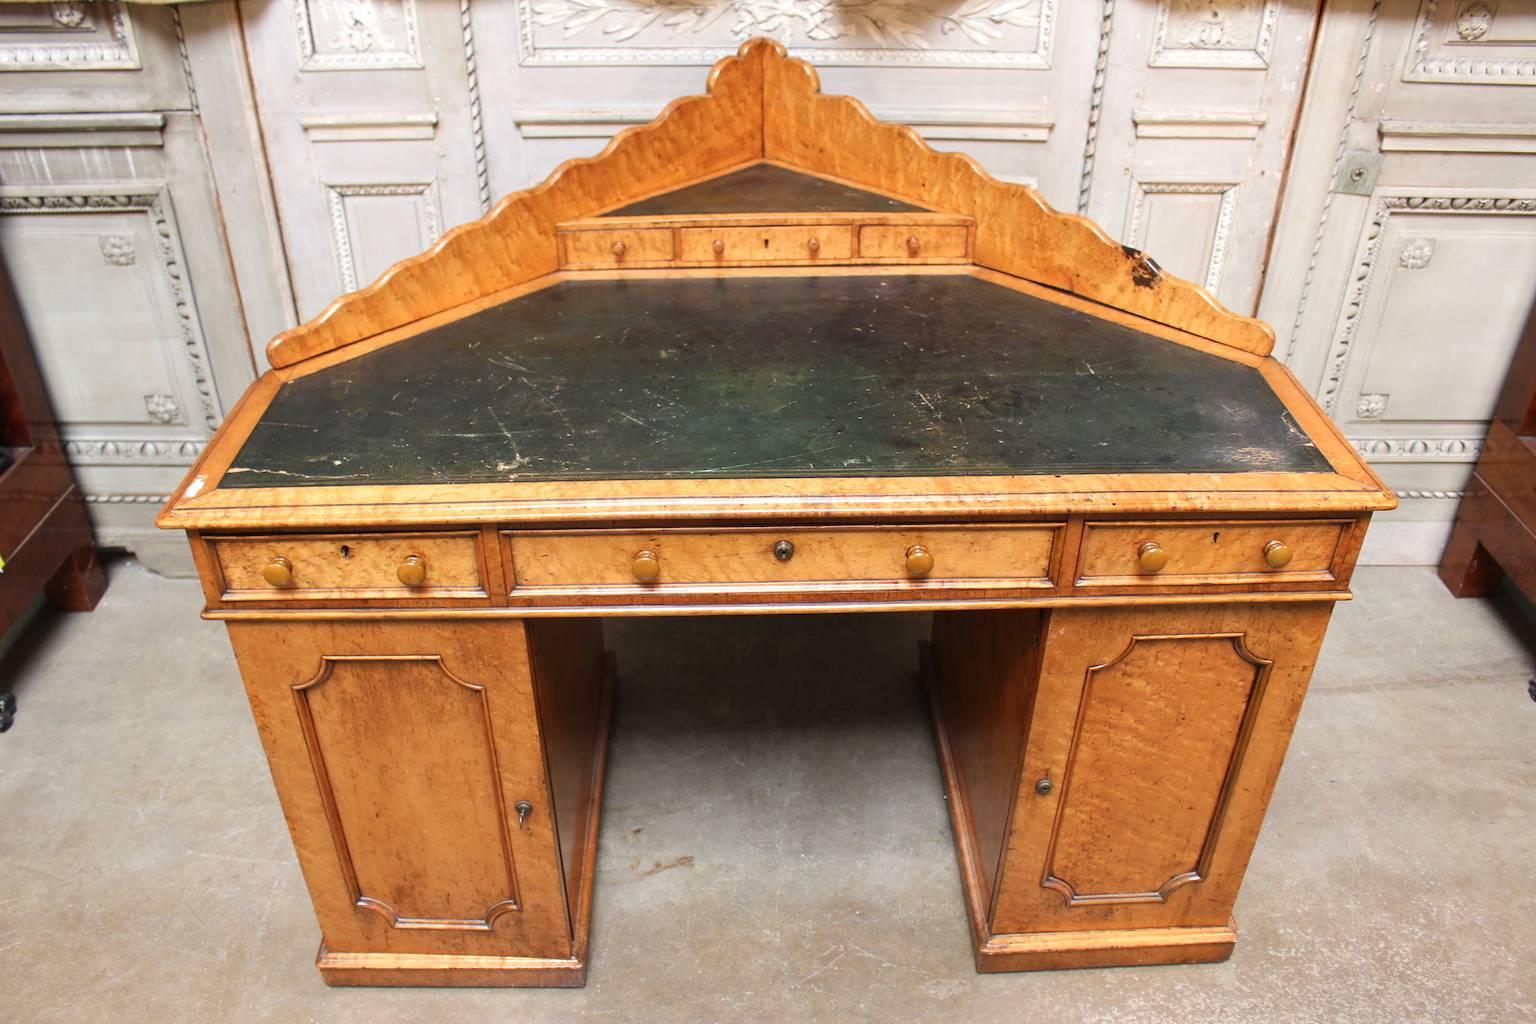 Hand-Carved 19th Century Enlish Victorian Corner Desk with Green Leather Top in Maple.  For Sale